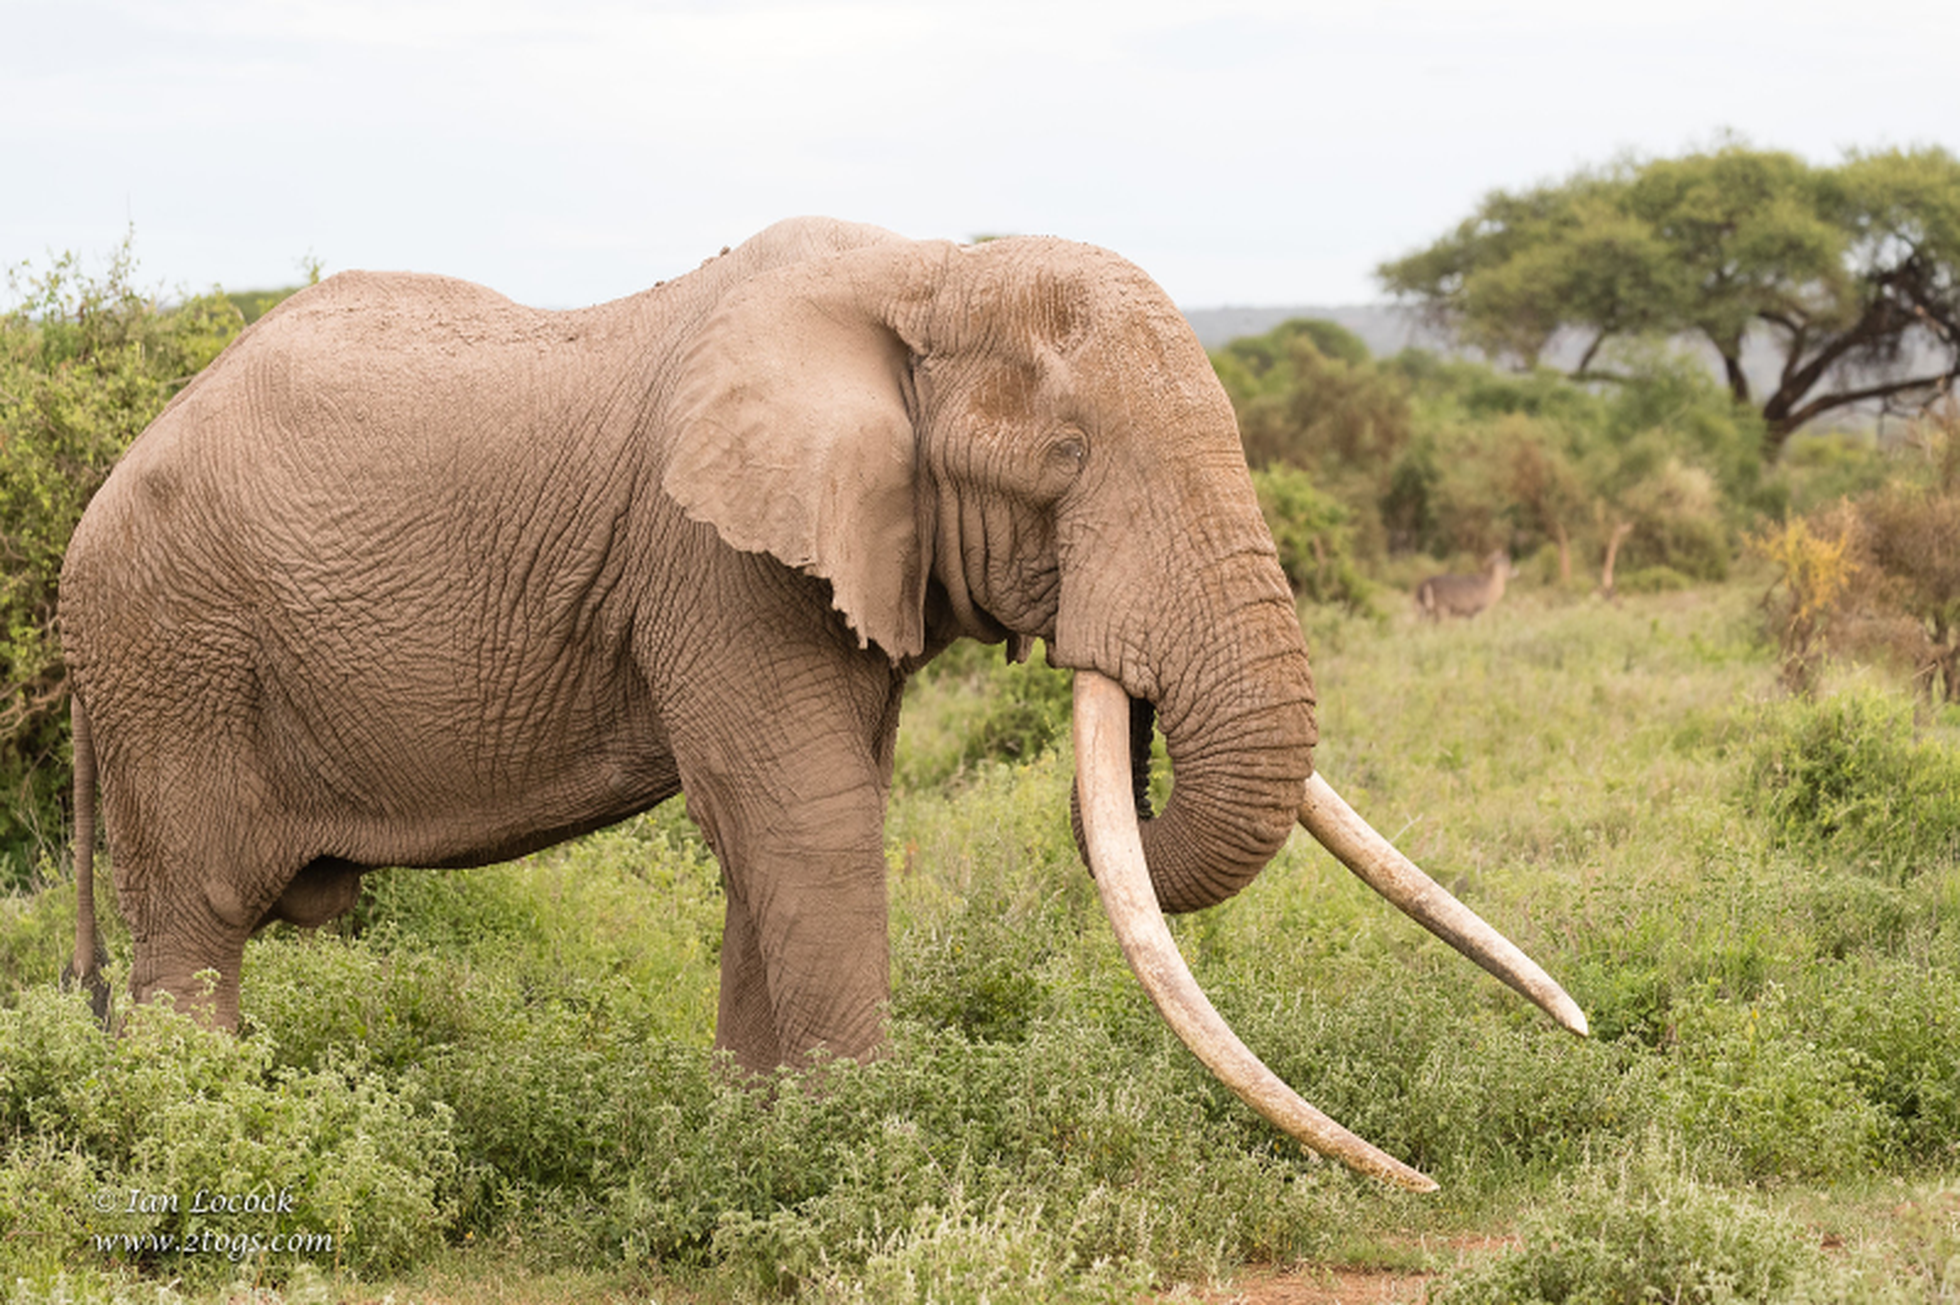 Tim the elephant dies in Kenya: Africa loses one of its last giant